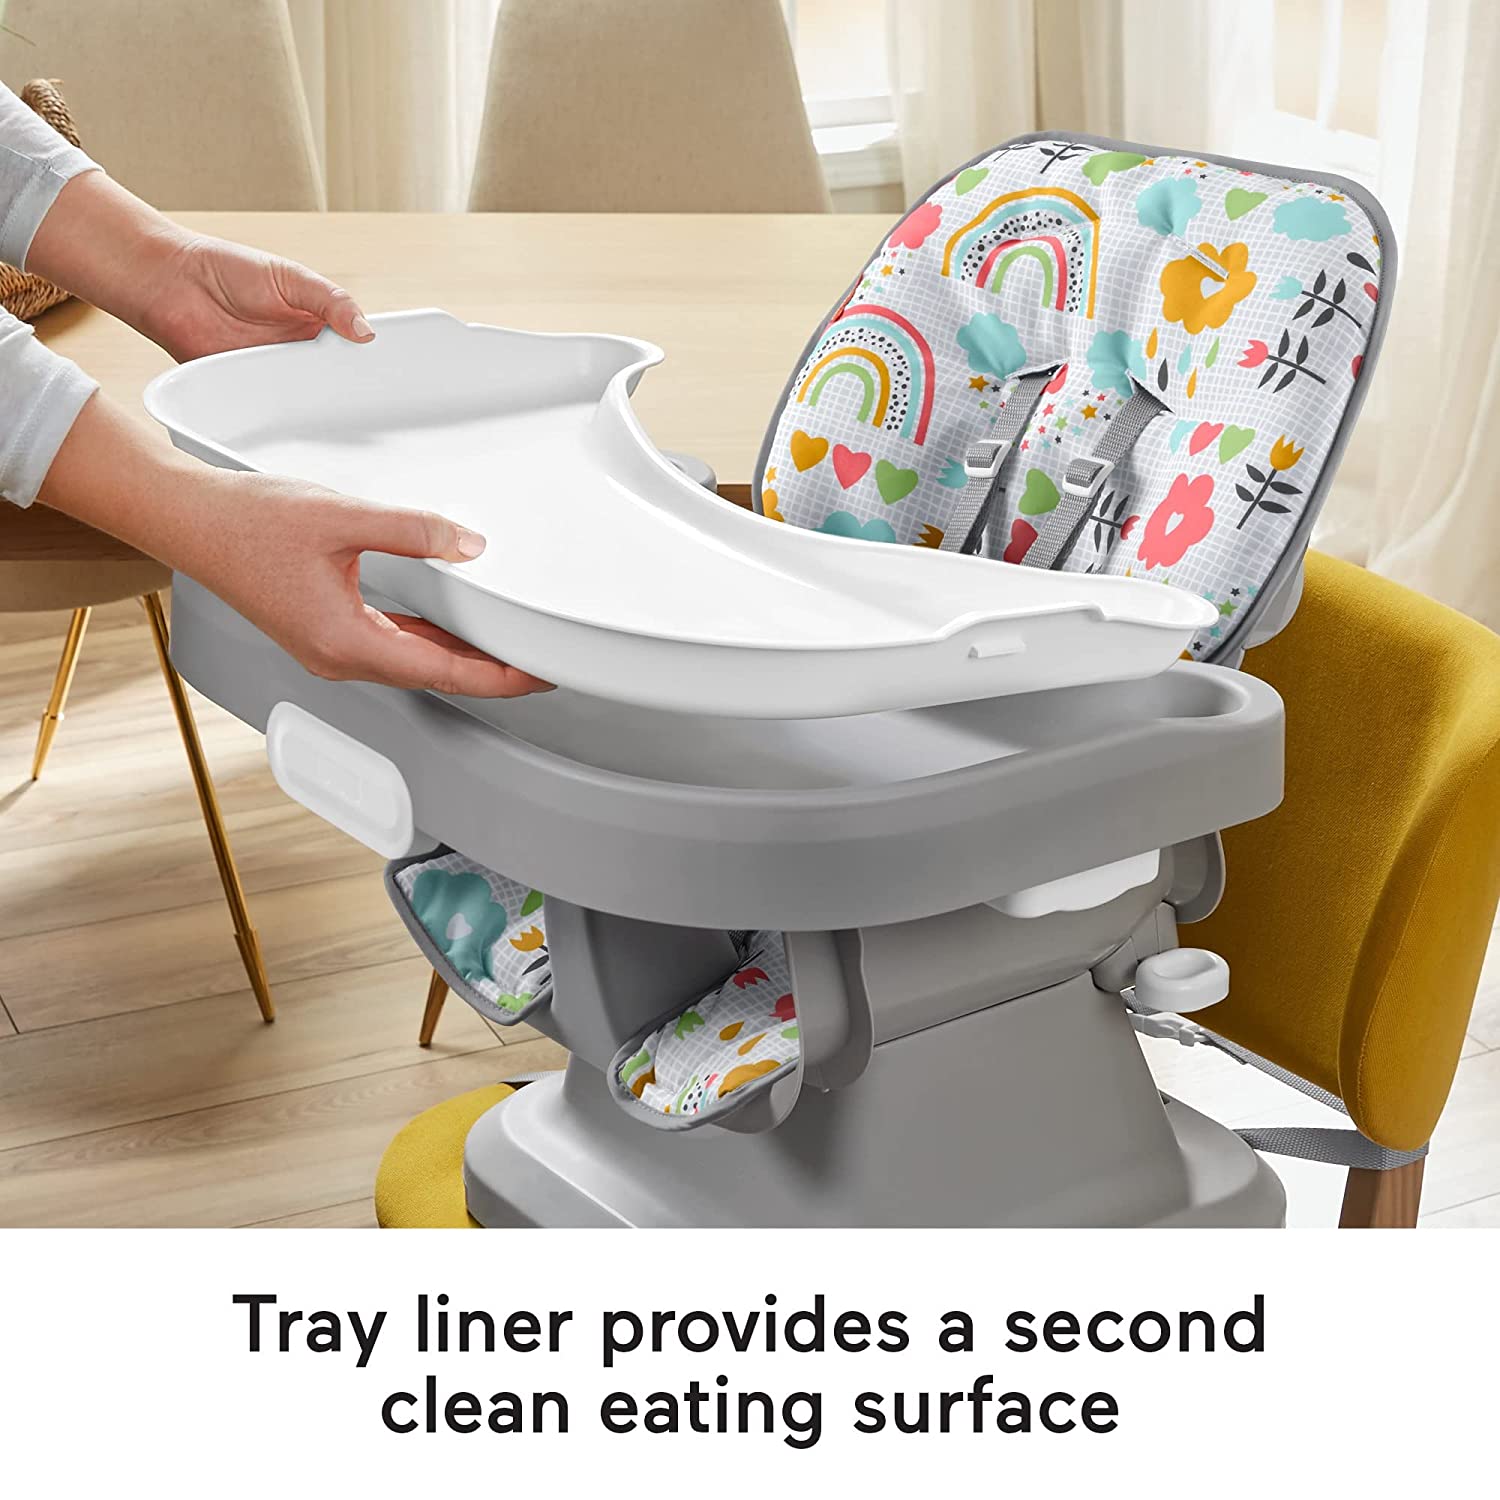 Fisher-Price SpaceSaver Simple Clean High Chair, Sun Showers - Portable for Baby-to-Toddler Dining Chair